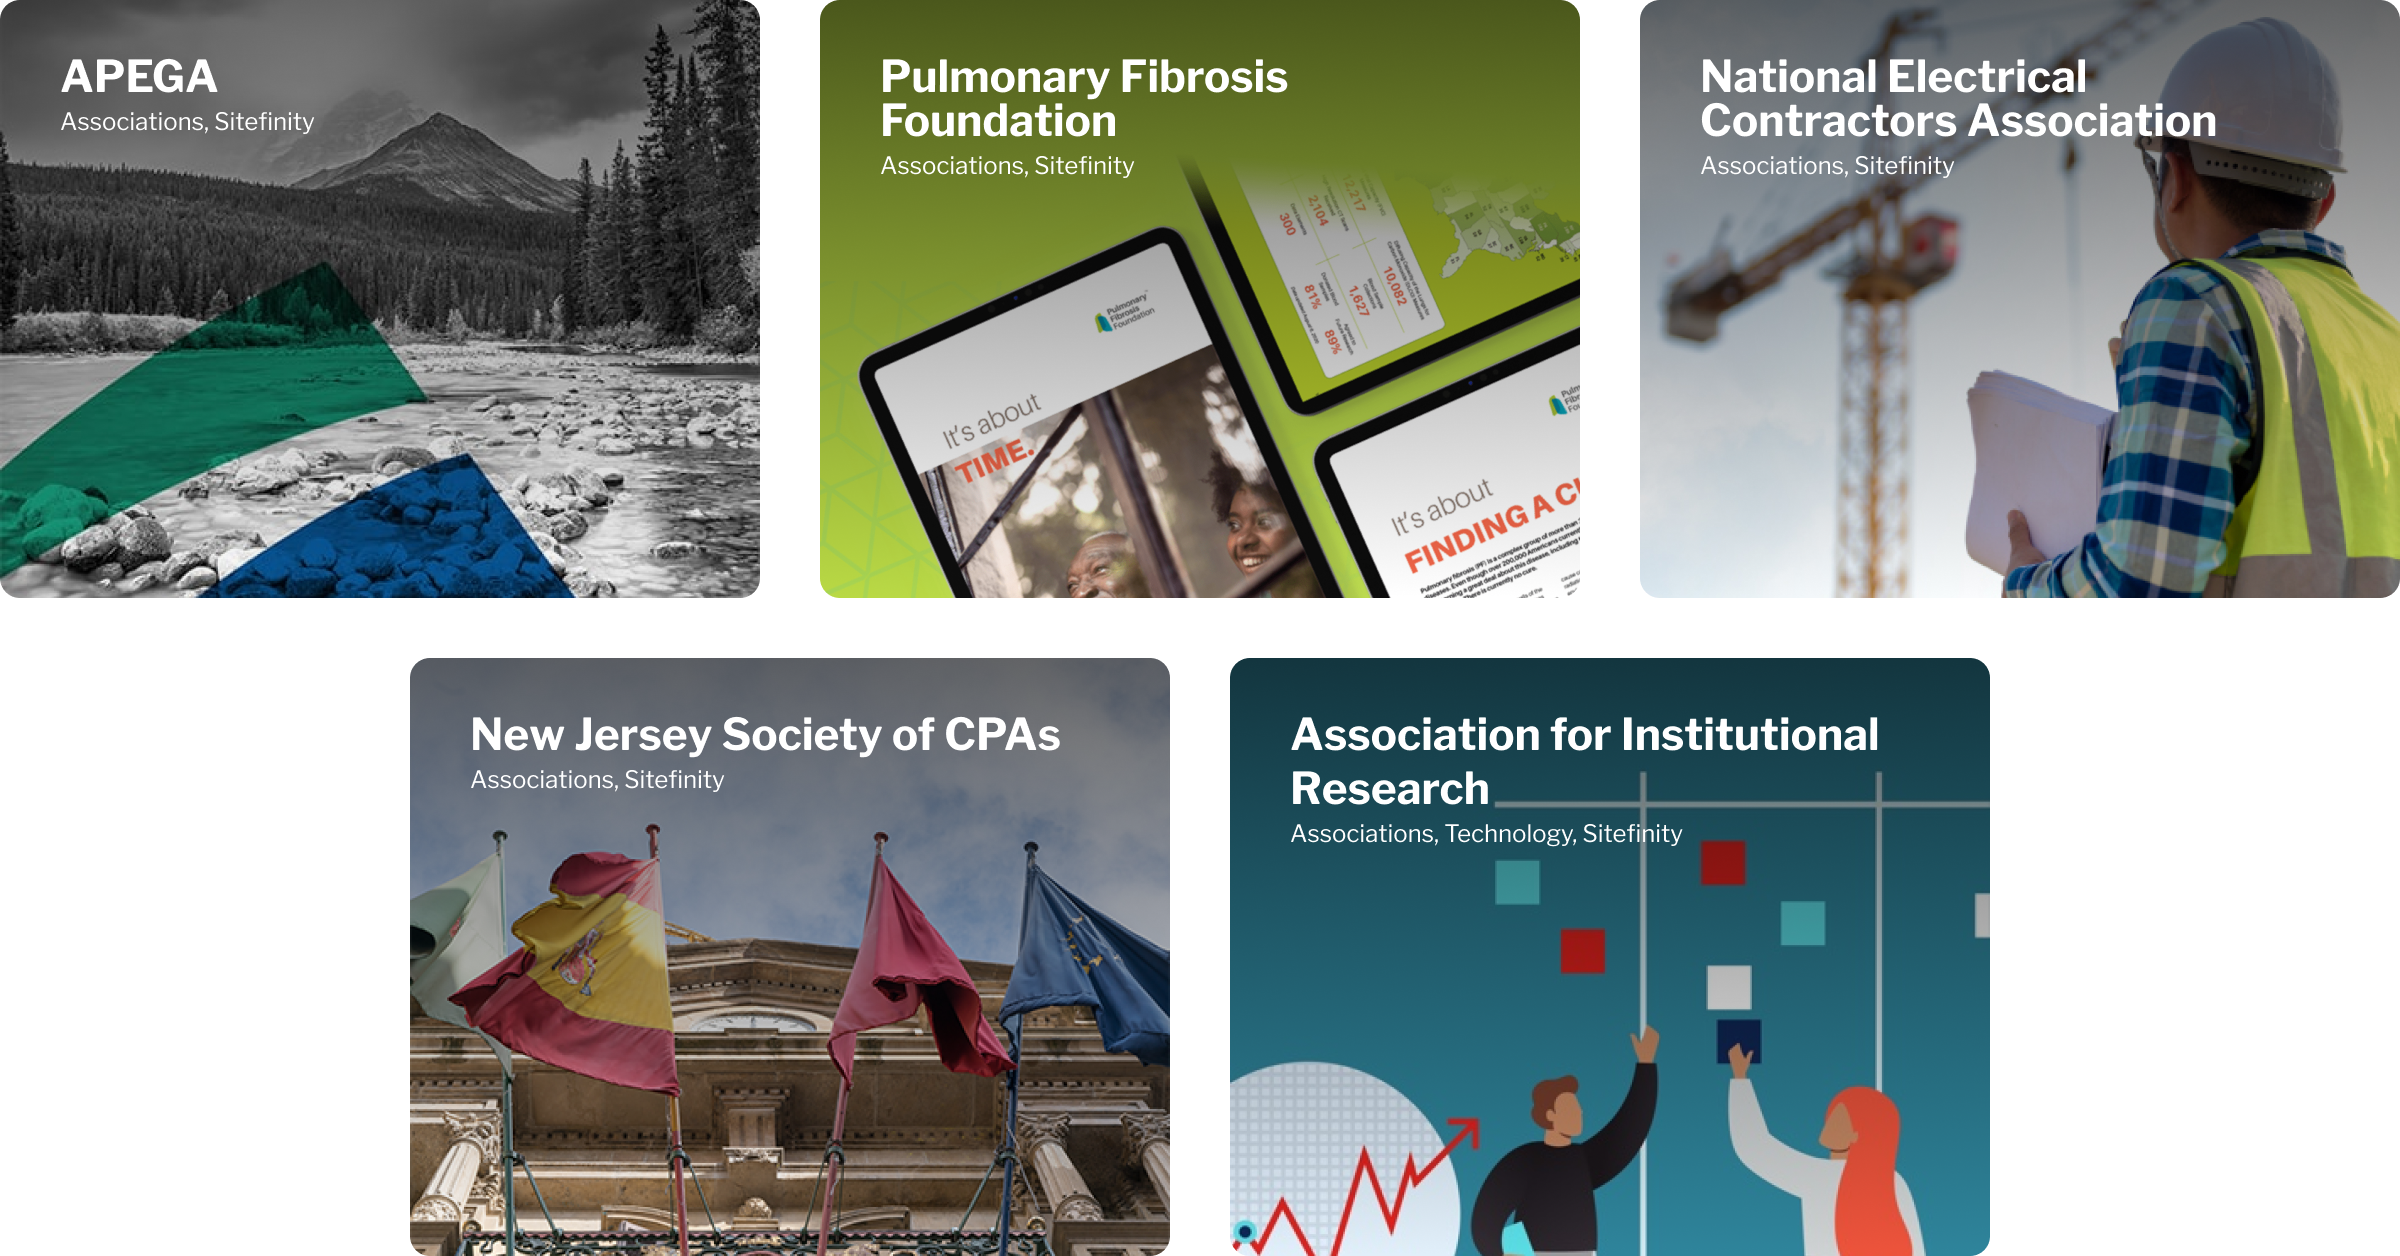 Montage of various association websites designed with Sitefinity, featuring APEGA, Pulmonary Fibrosis Foundation, National Electrical Contractors, NJ Society of CPAs, and Association for Institutional Research